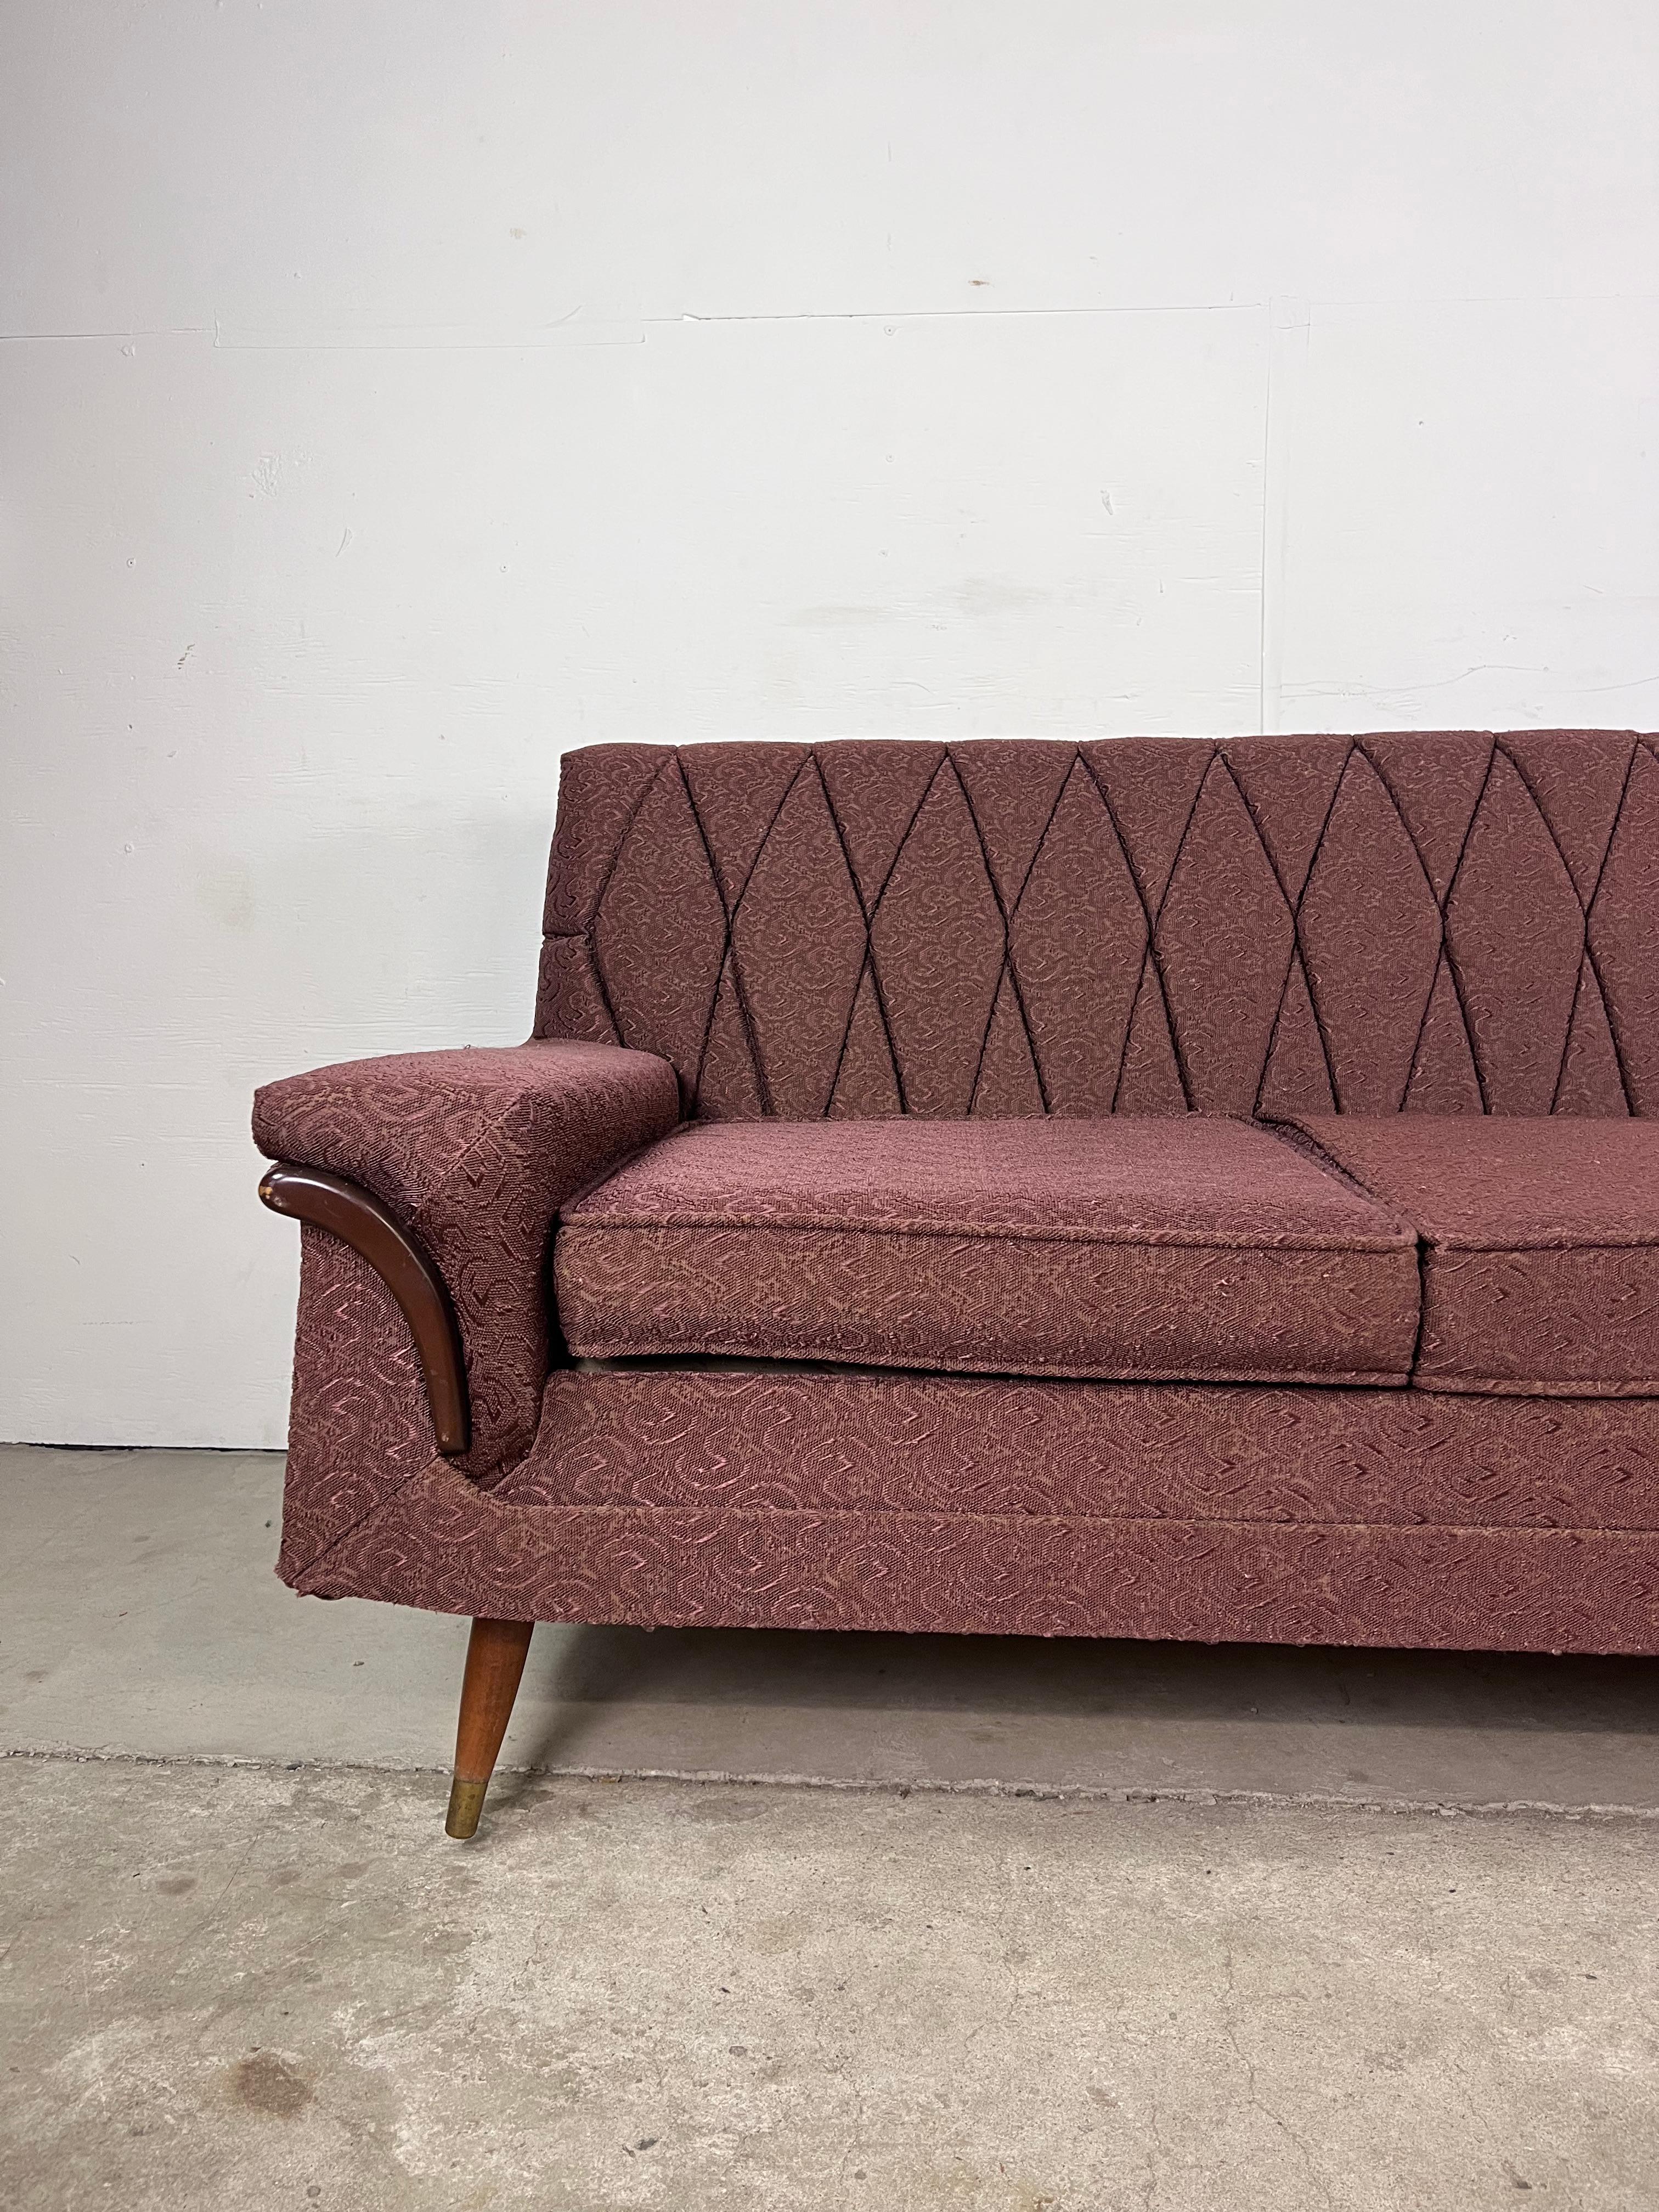 American Mid Century Modern Four Seater Sofa with Vintage Upholstery For Sale